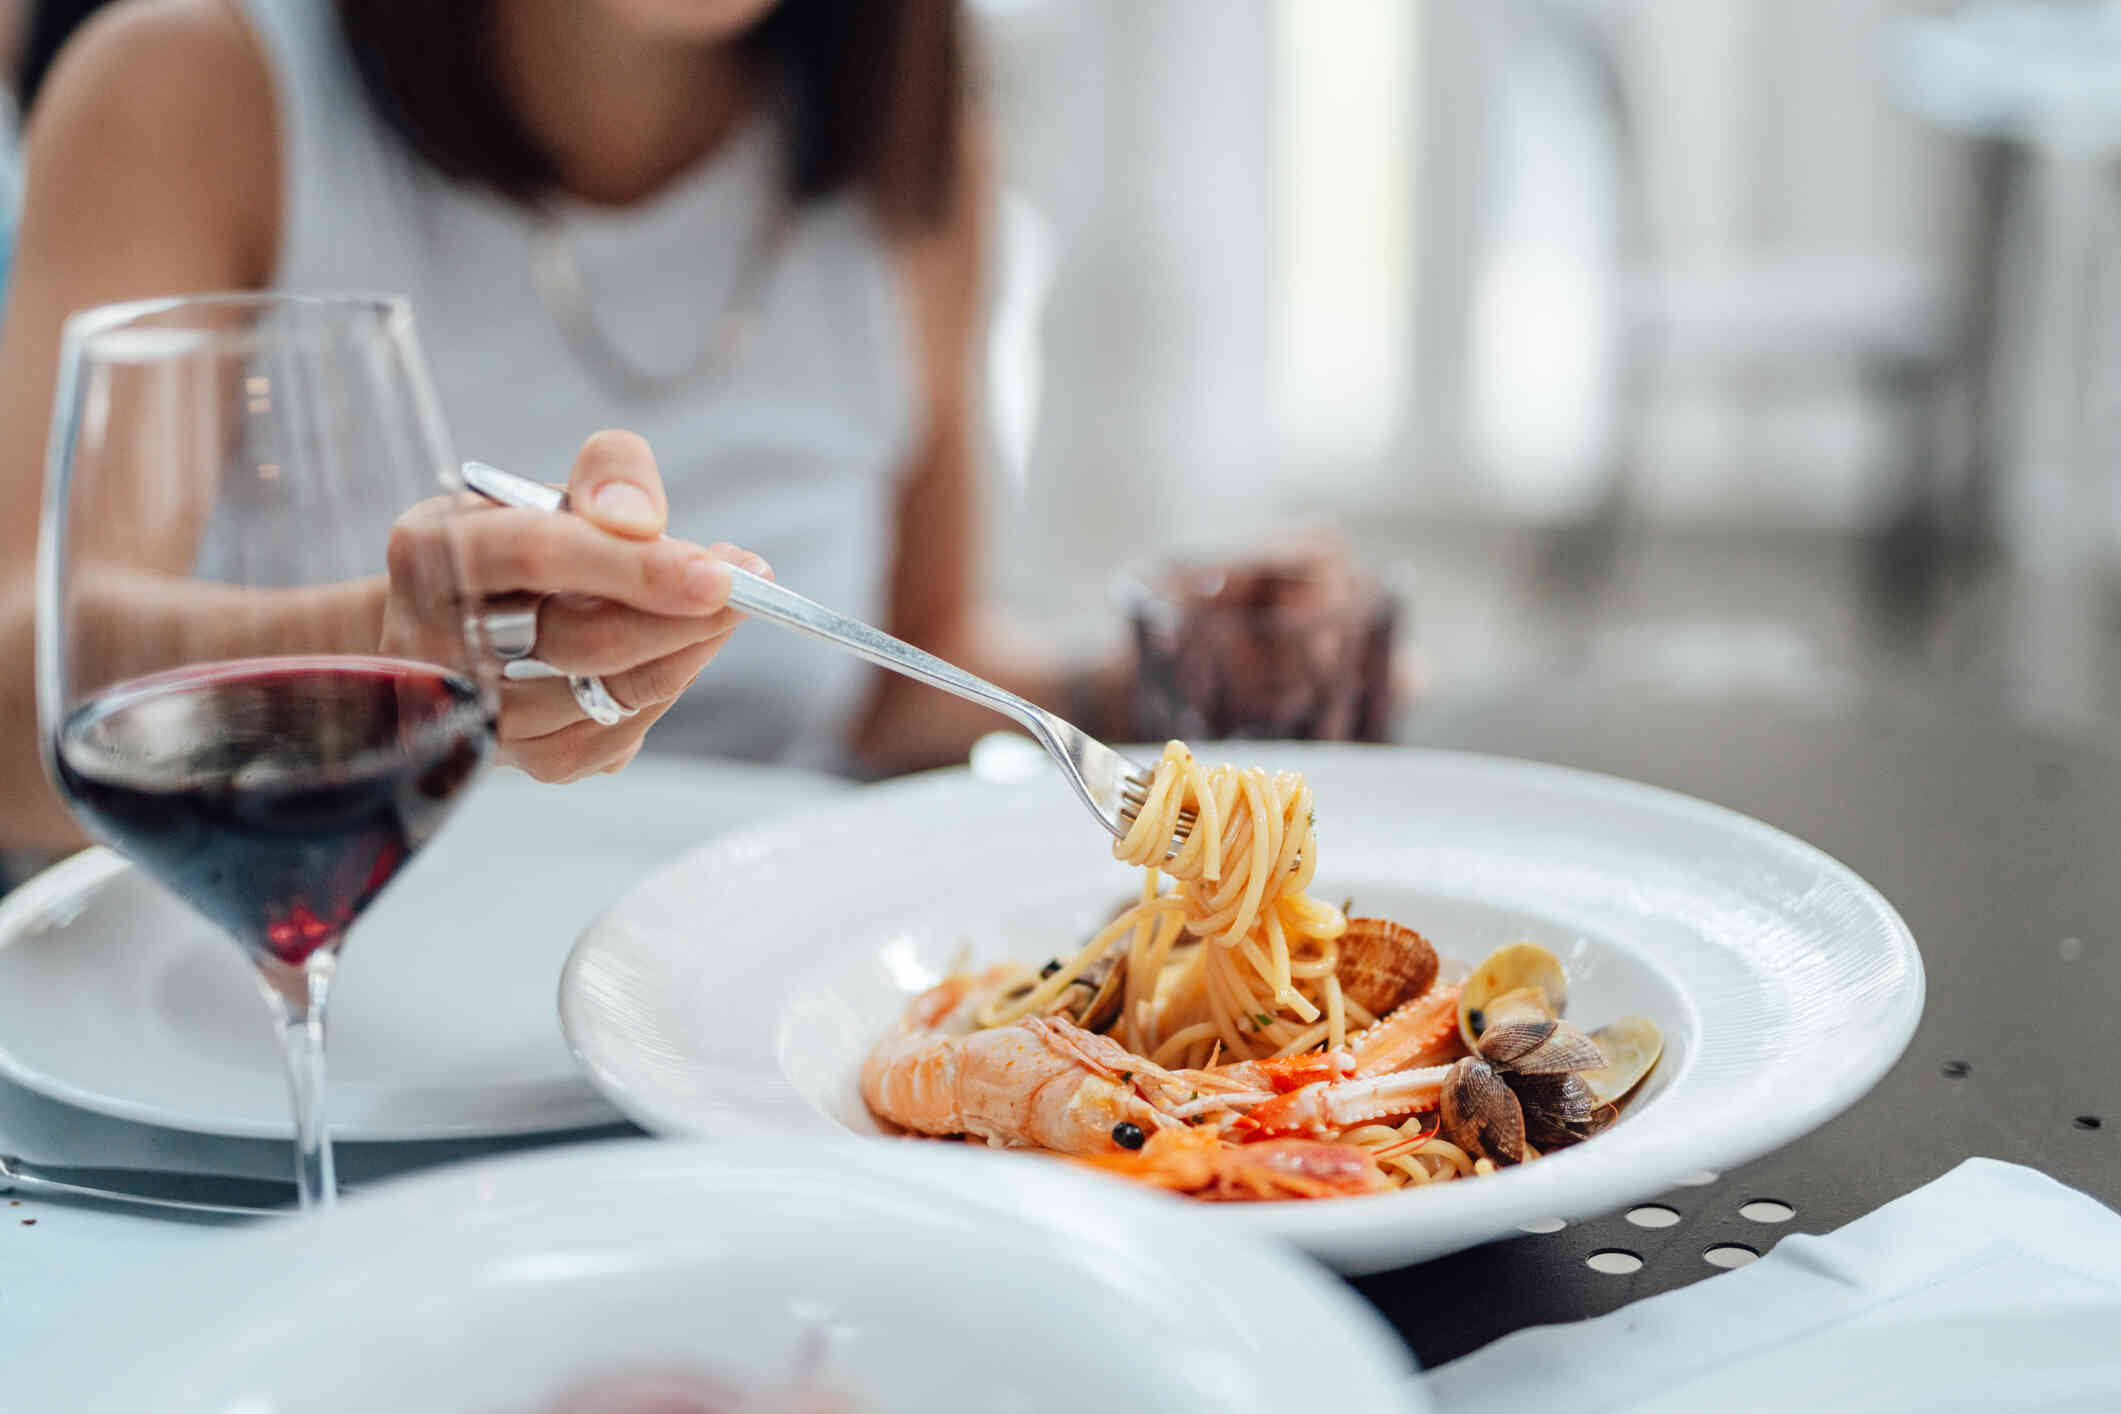 A close up of a woman twirling some pasta on her fork while sitting at a dinner table.